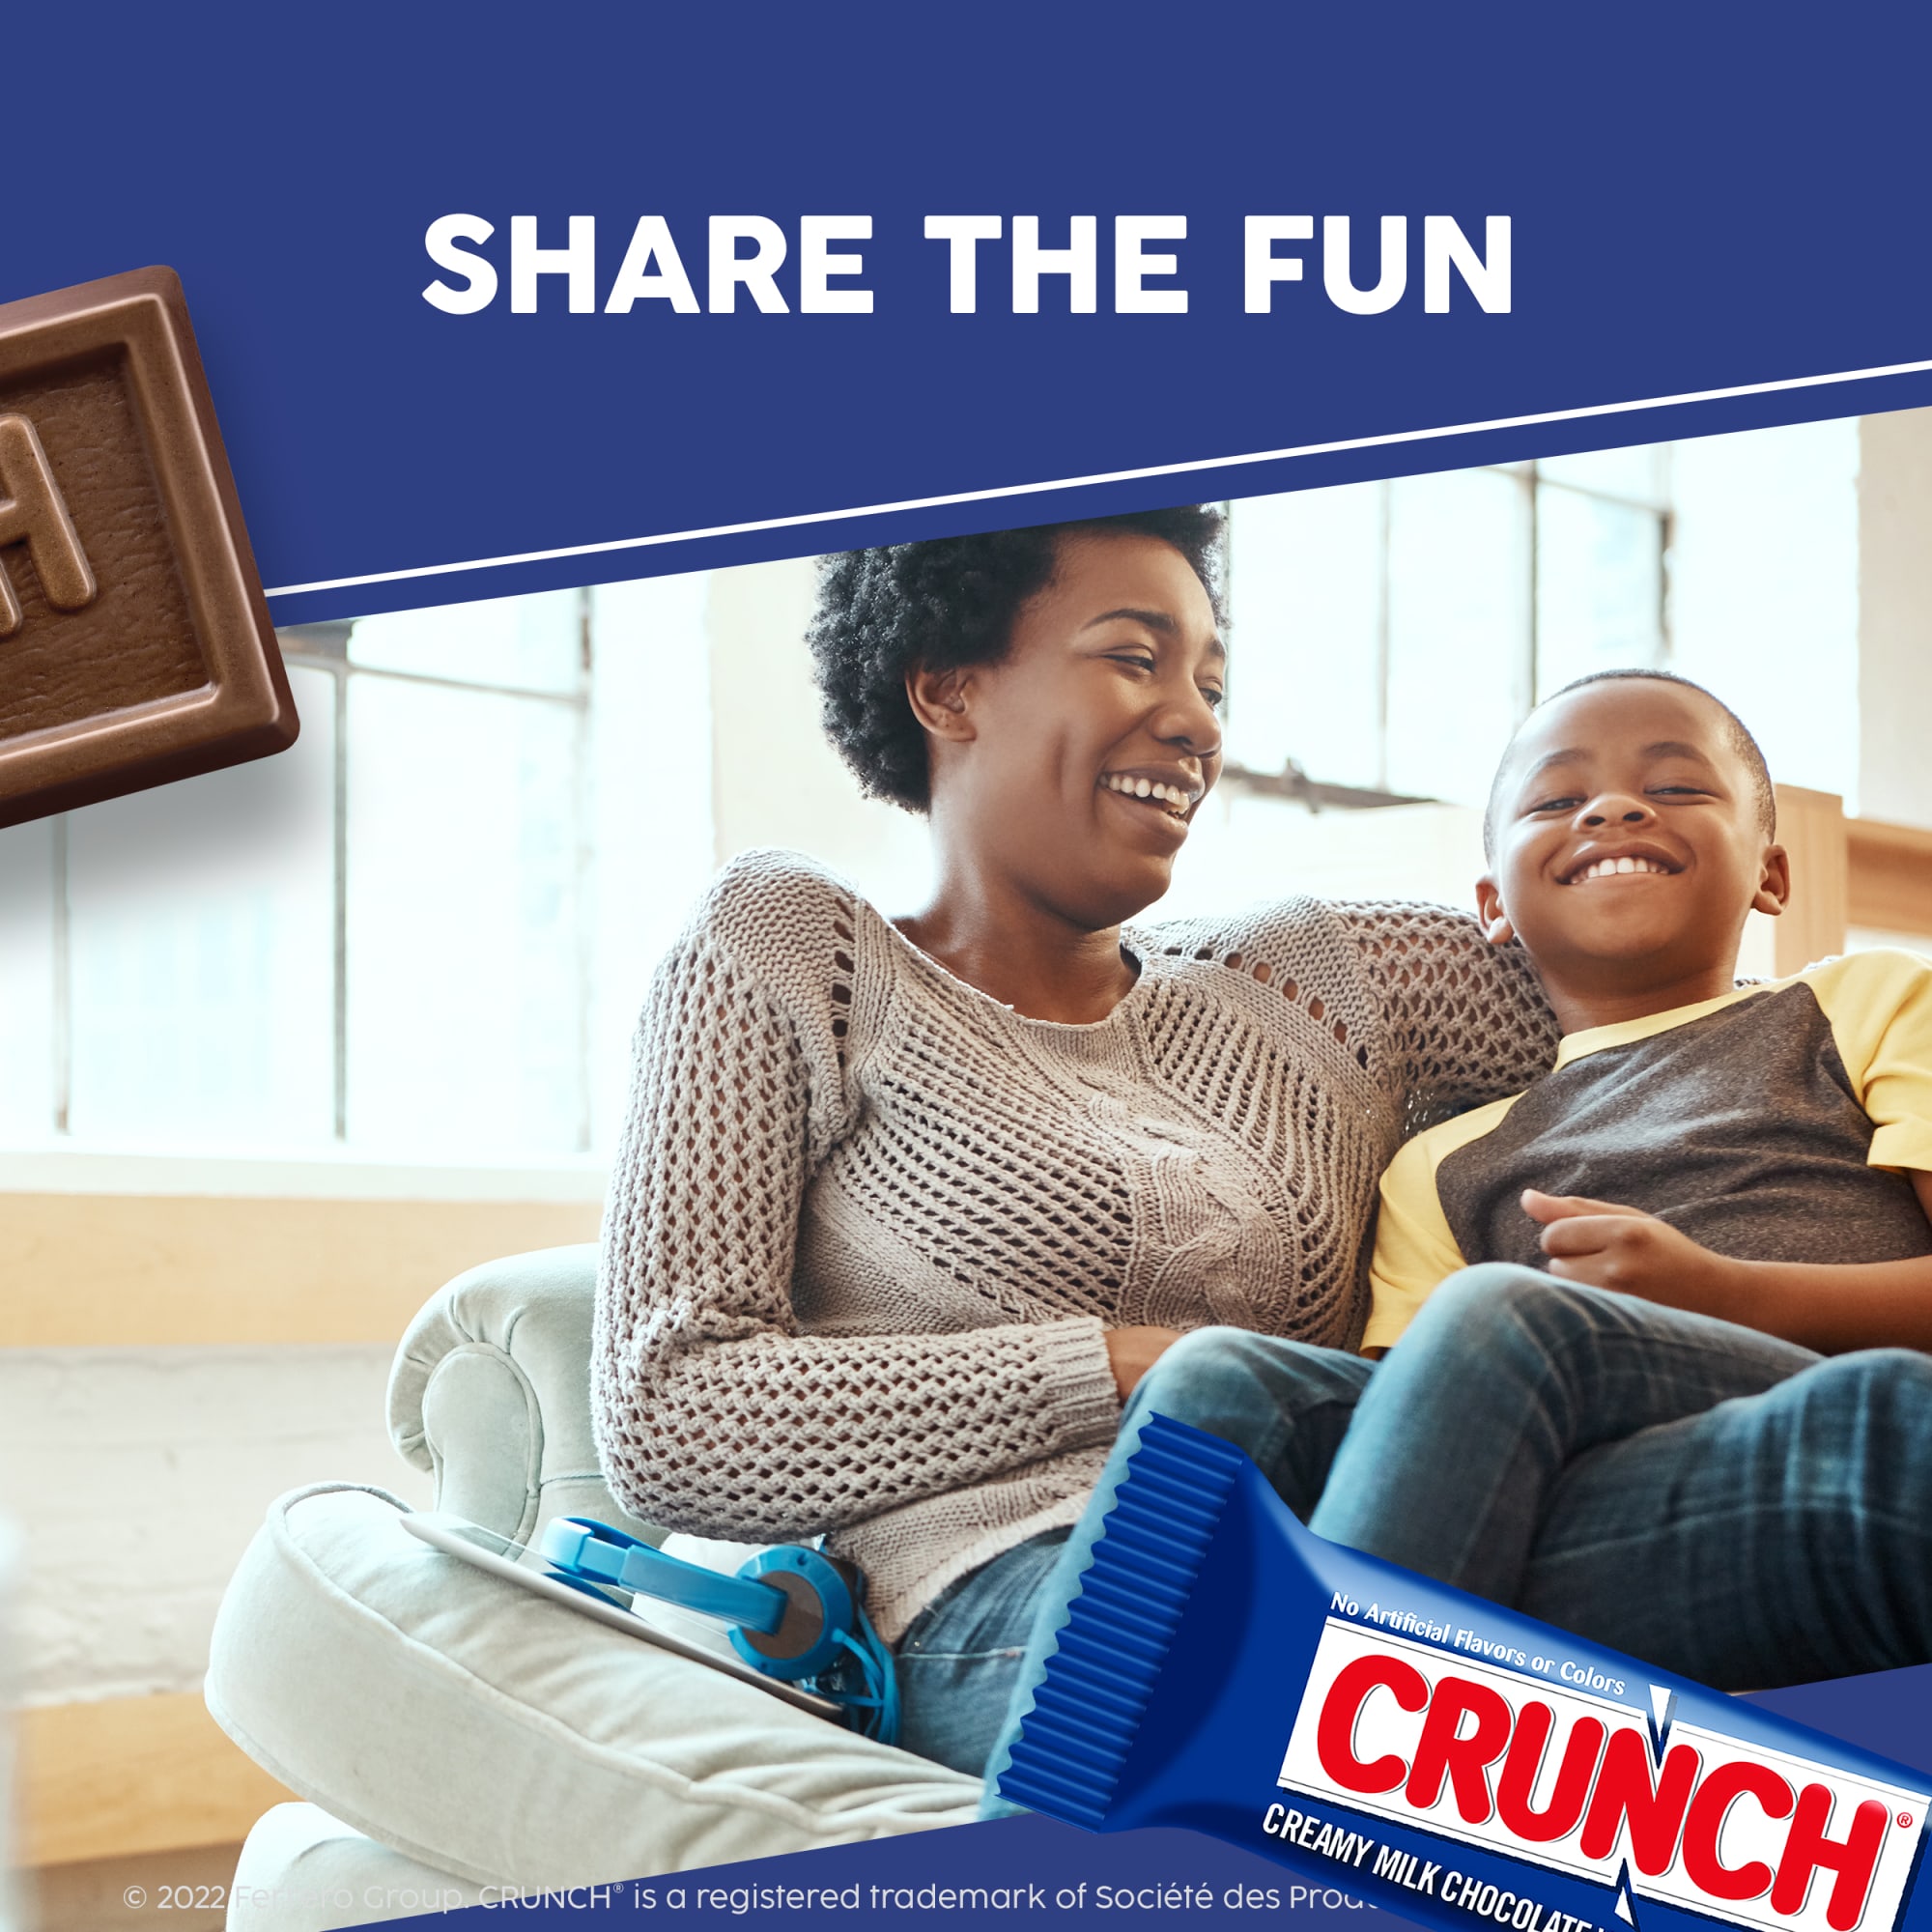 CRUNCH Milk Chocolate and Crisped Rice, Share Size Candy Bars, Share Pack, 2.7 oz - image 5 of 9